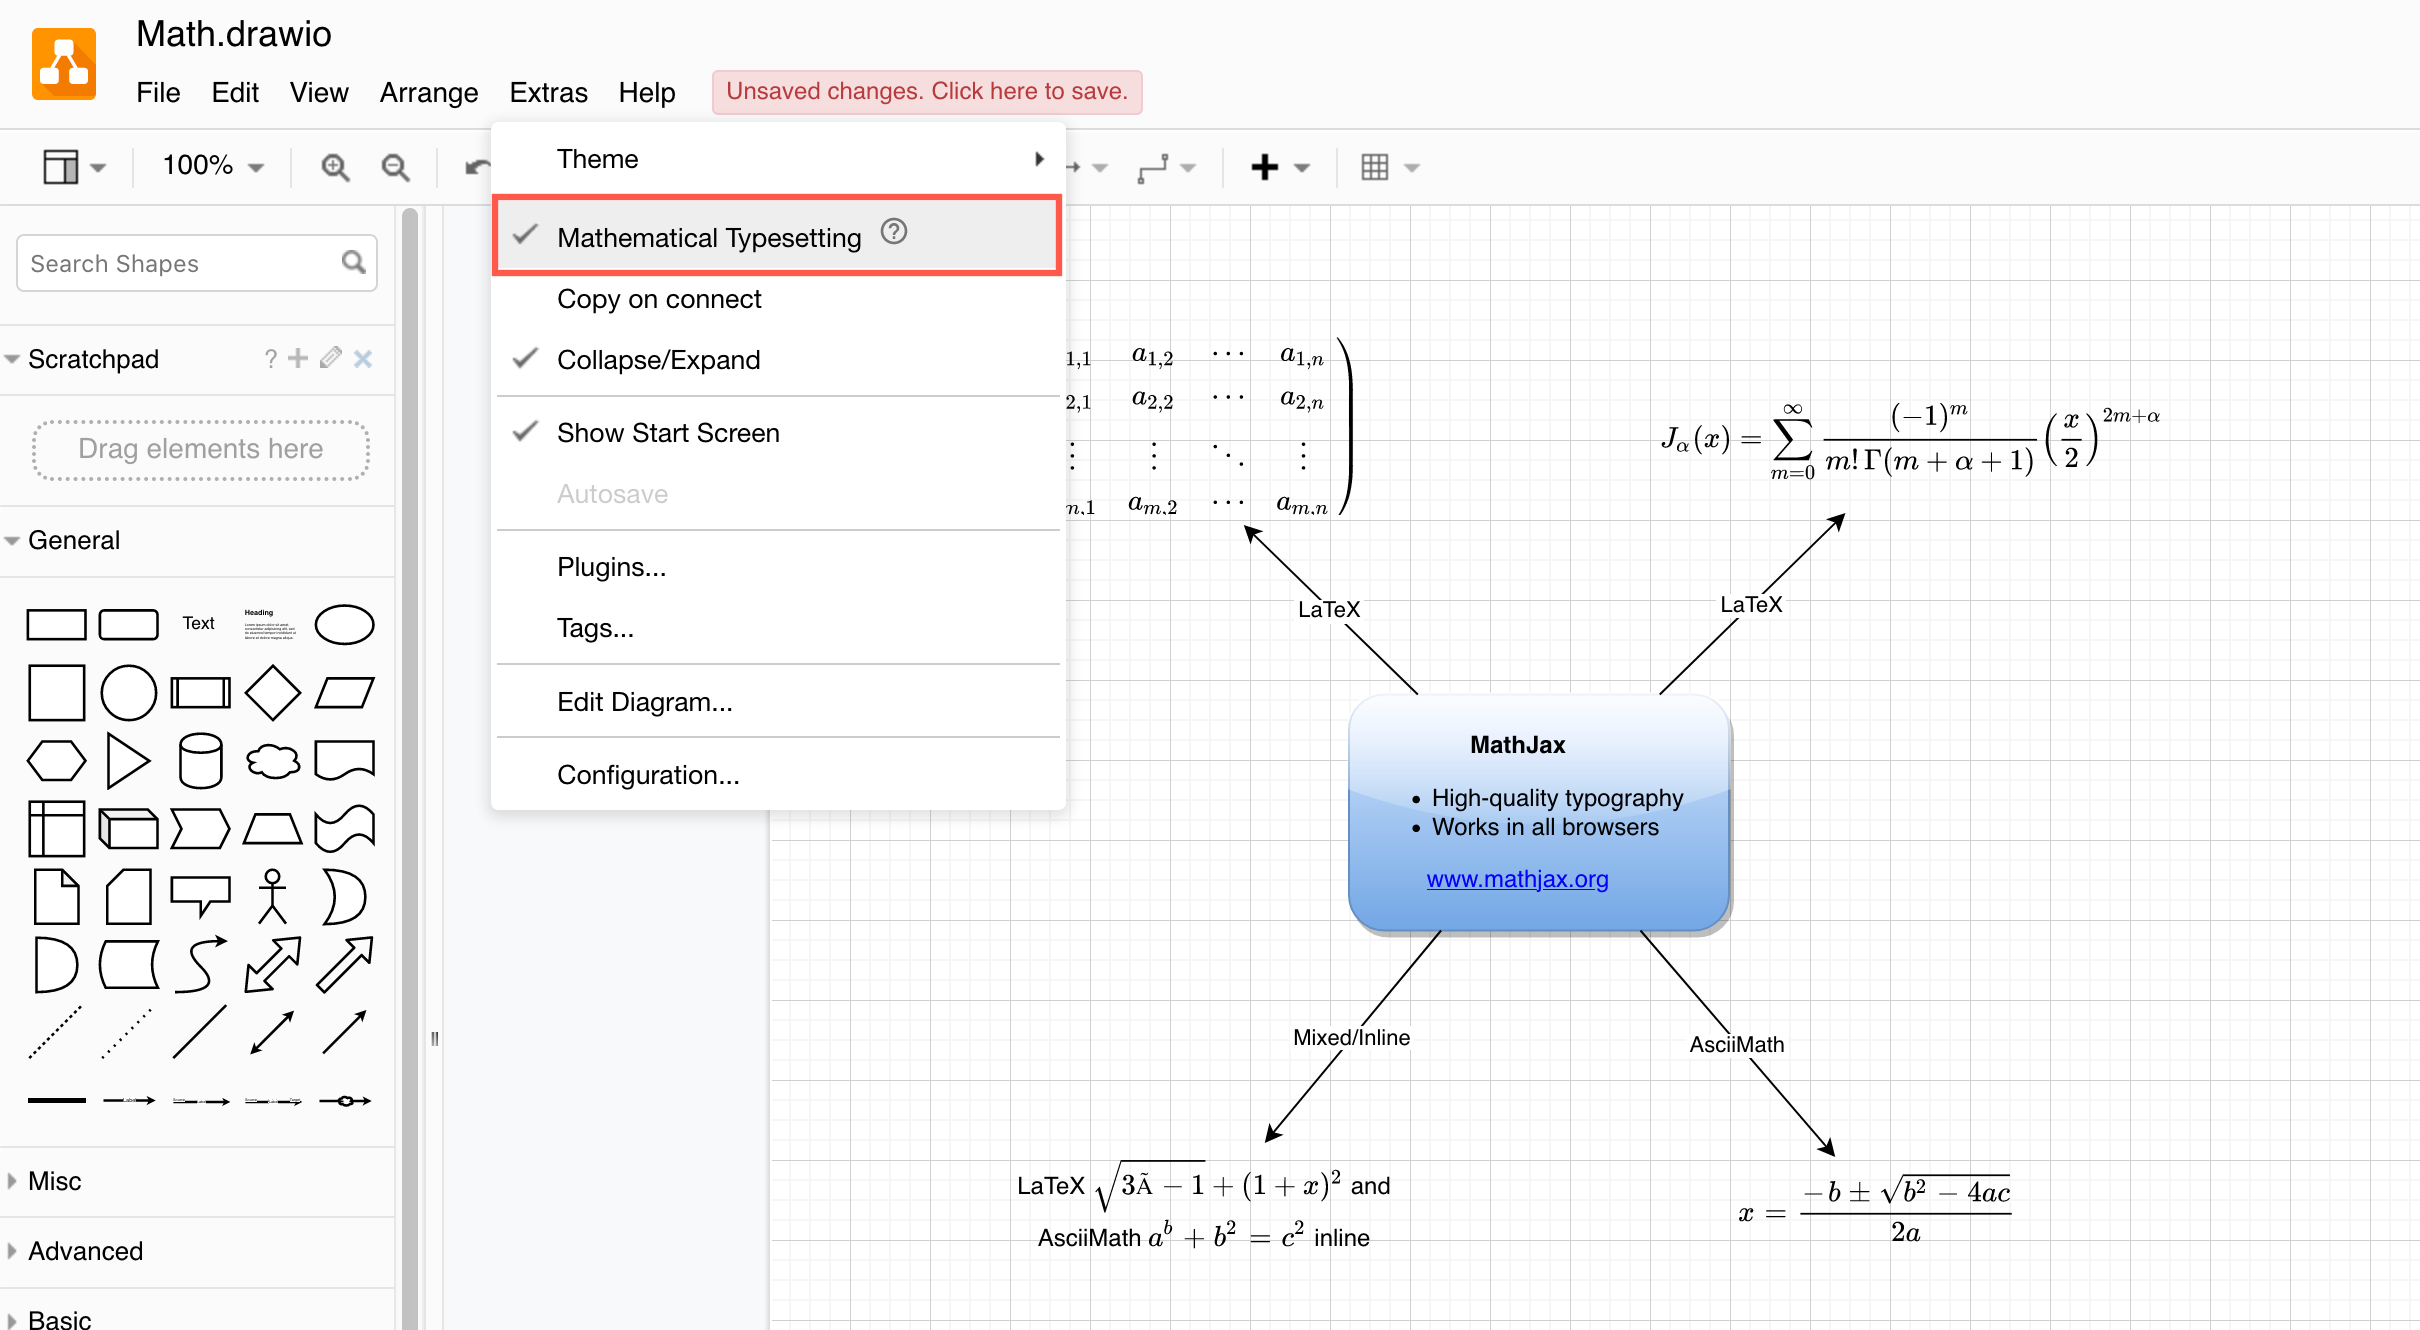 Click Extras > Mathematical Typesetting to render your equations in MathJax